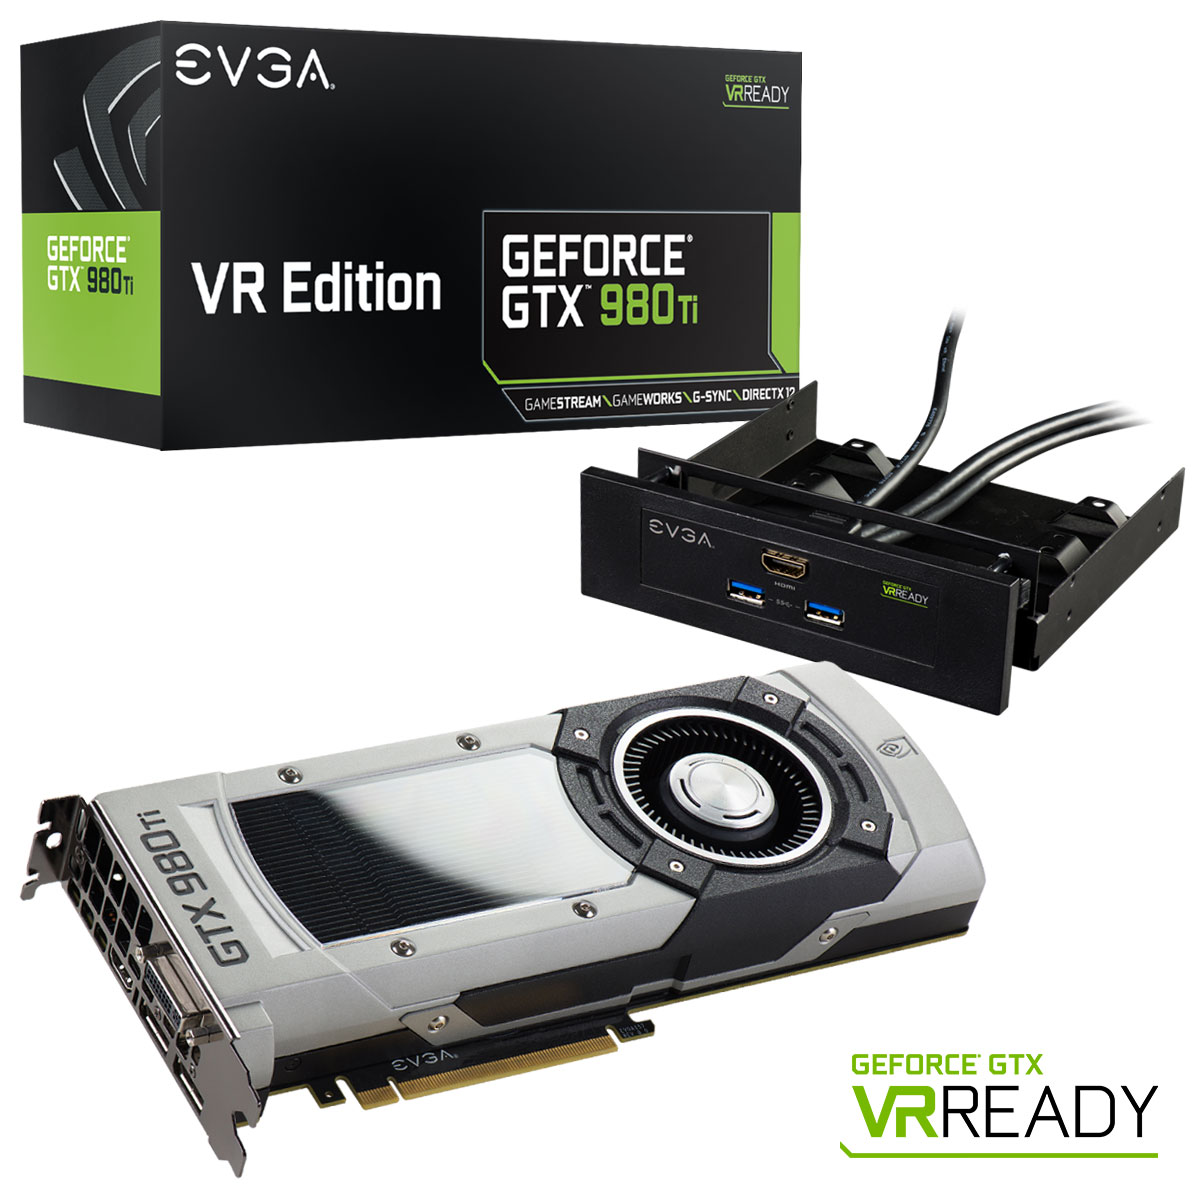 Media asset in full size related to 3dfxzone.it news item entitled as follows: EVGA lancia la GeForce GTX 980 Ti VR EDITION GAMING (anche ACX 2.0+) | Image Name: news23776_GeForce-GTX-980-T-VR-EDITION-GAMING_1.jpg